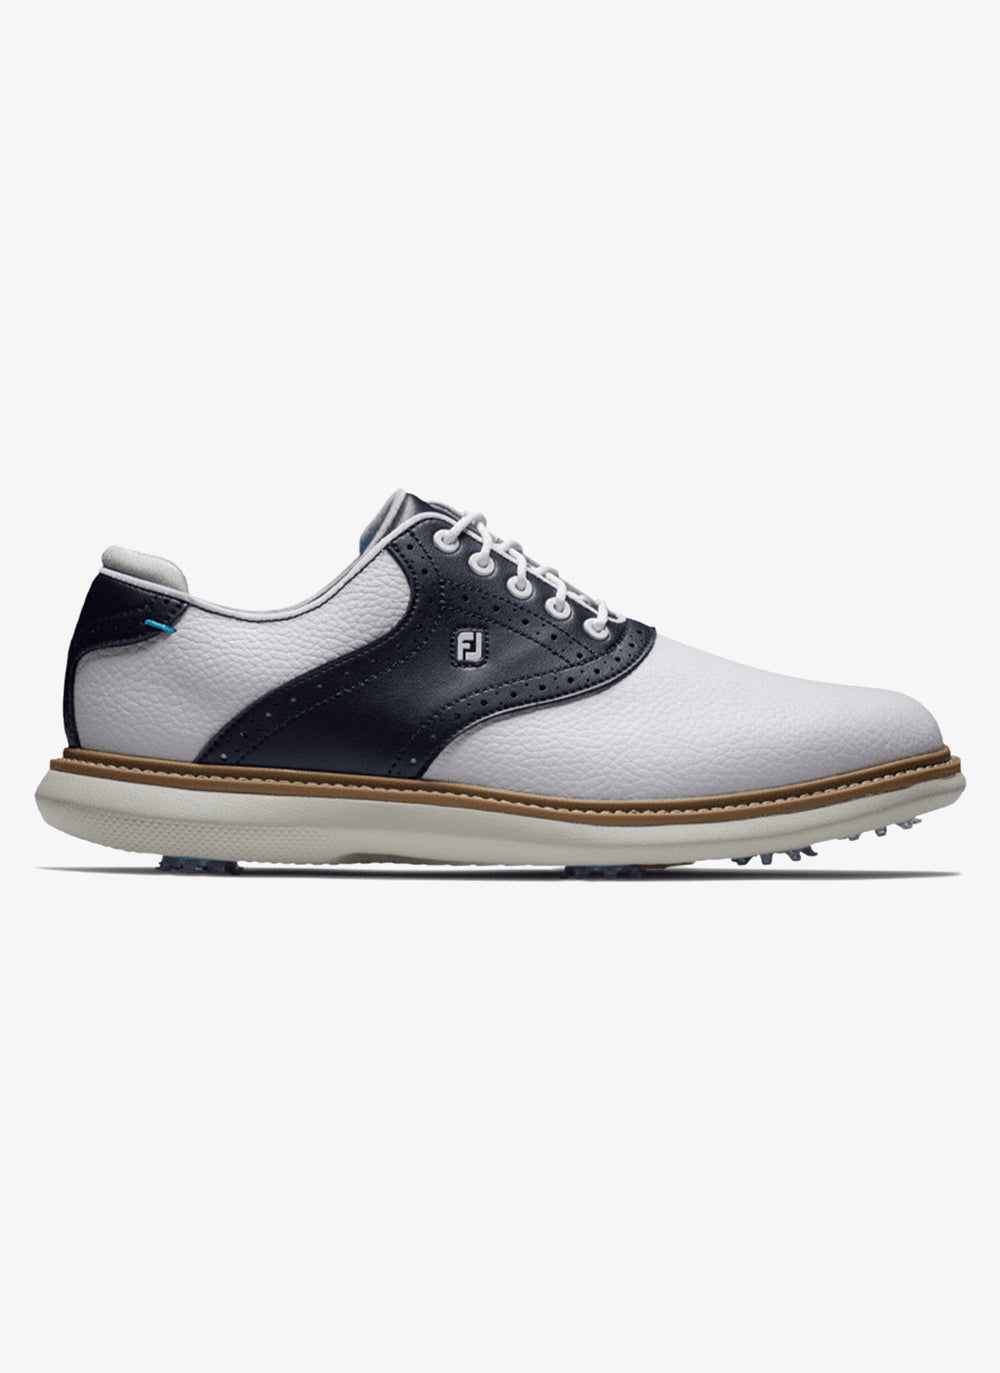 FootJoy Traditions Golf Shoes 57899